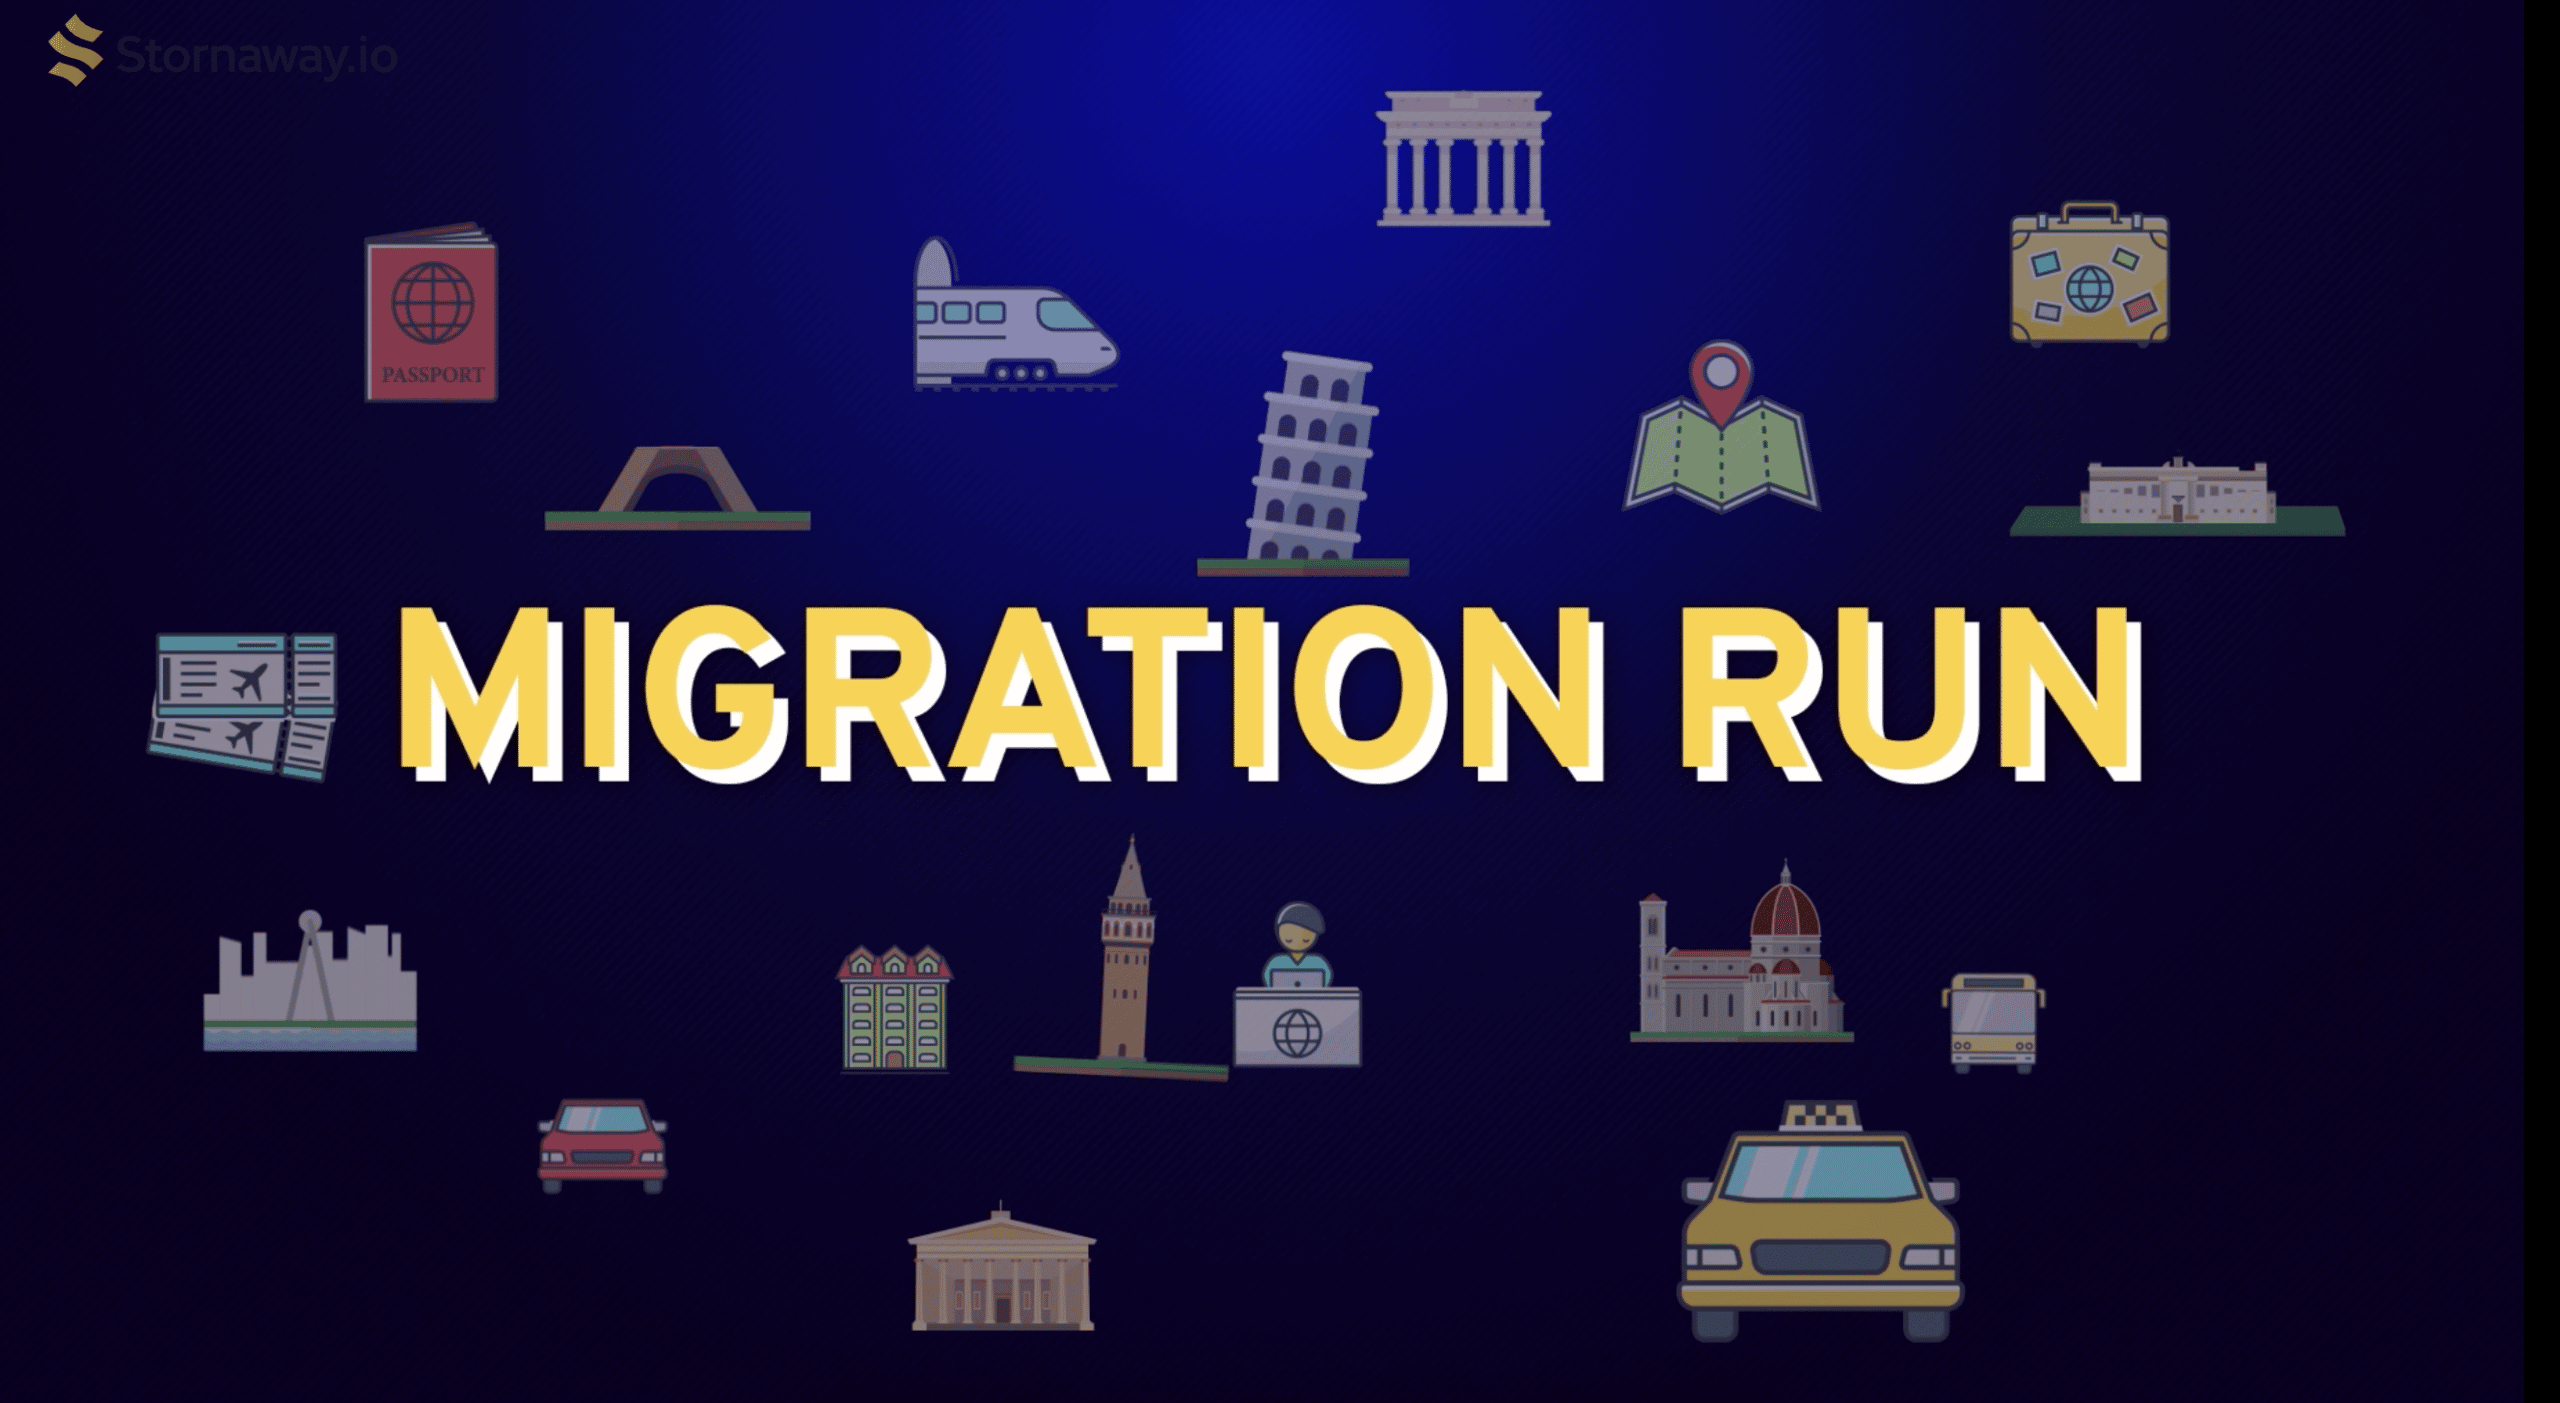 Title screen for Migration Run - Yellow letters spell: Migration Run. Behind the title there is a blue background with computer graphics, these show city and travel features such as taxis, skyscrapers, maps, cameras, suitcases.